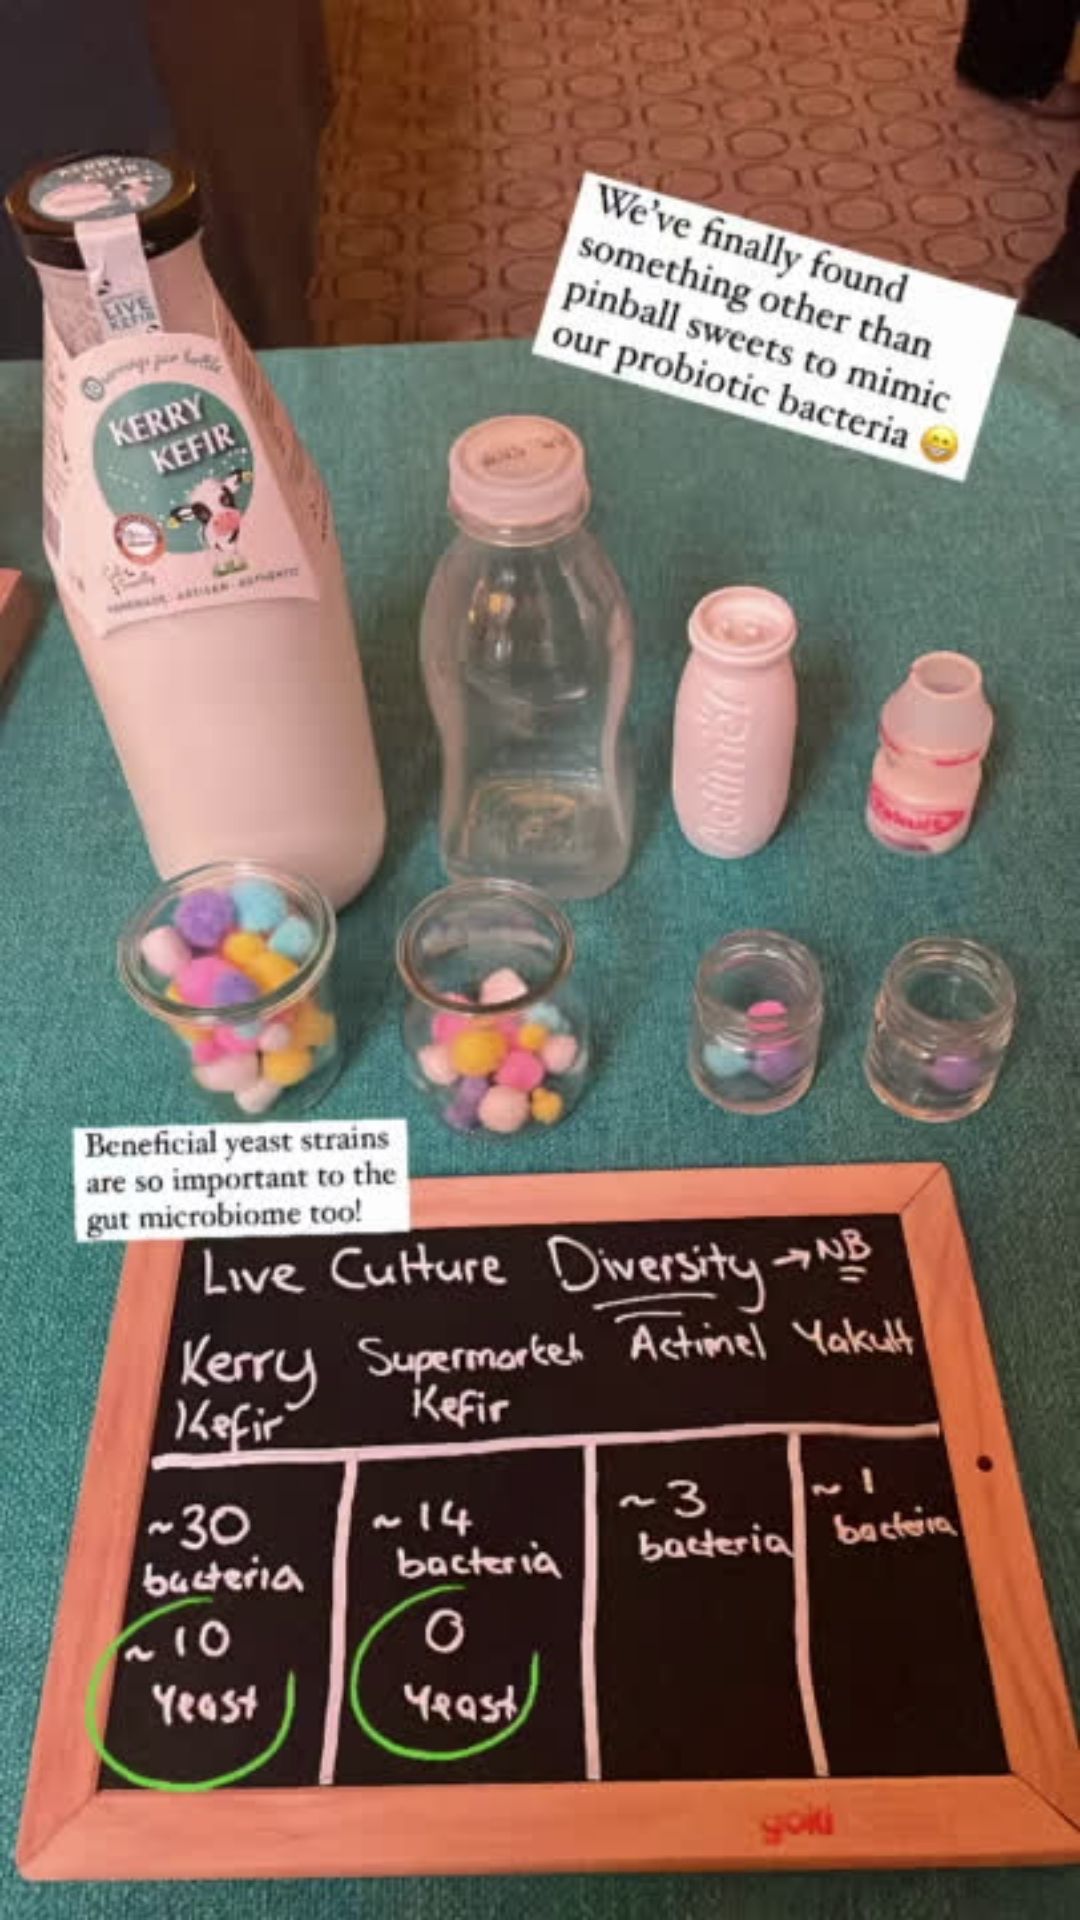 Comparison of good bacteria and yeast strains in traditional kefir (30 bacteria, 10 yeast), like Kerry kefir, compared to supermarket kefir (14 bacteria), Actimel (3 bacteria) and Yakult (1 bacteria)